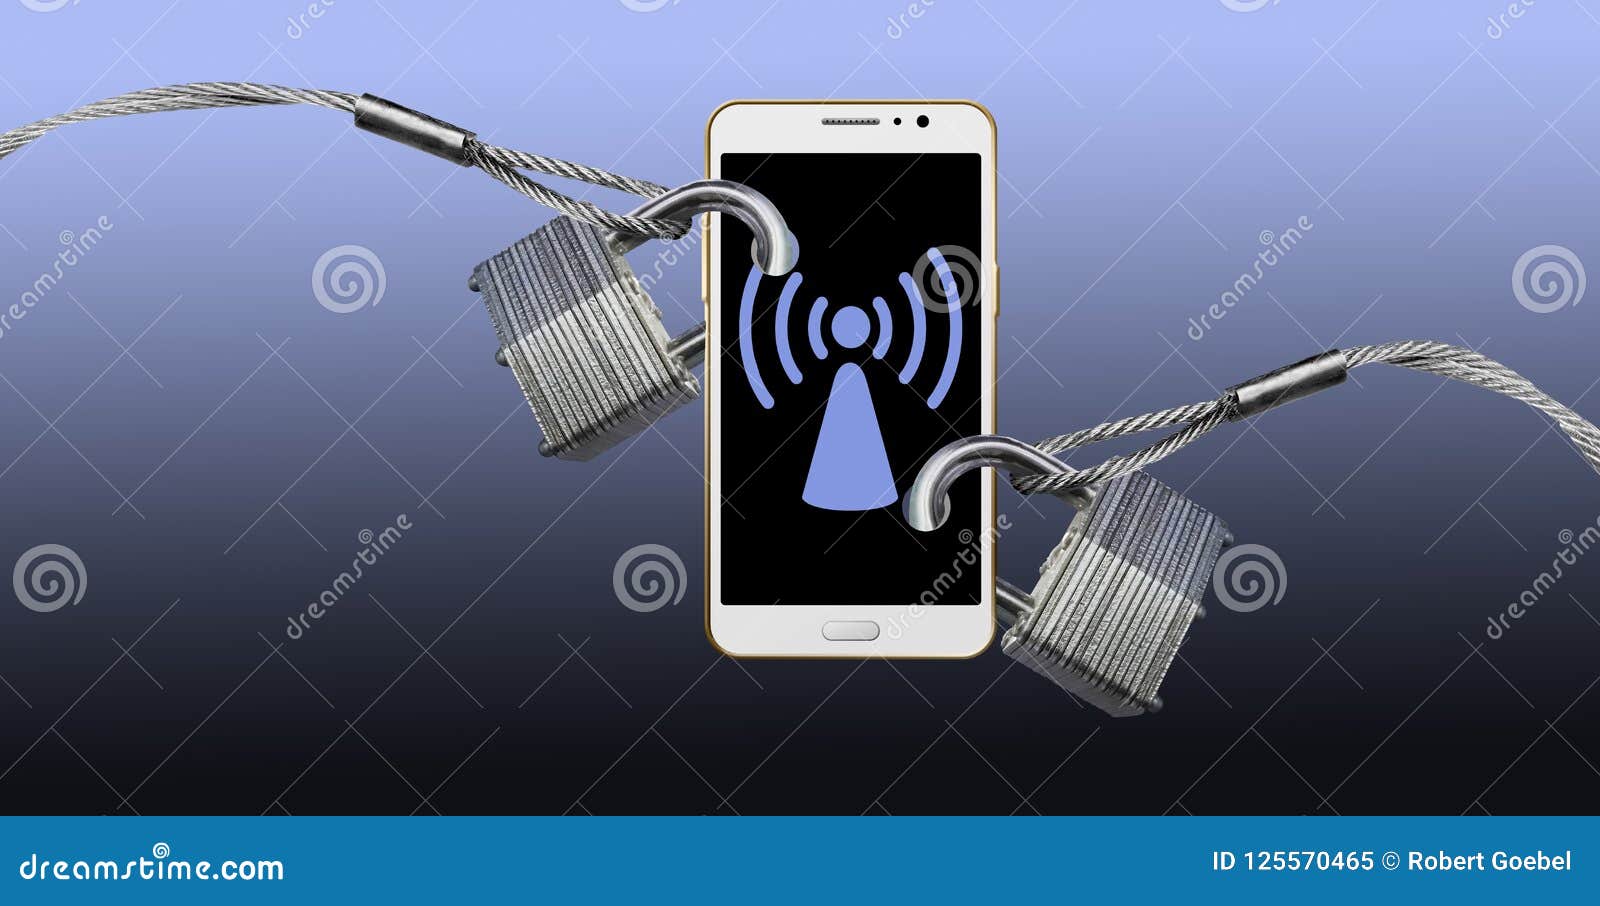 padlocks and steel cables securing a cell phone illustrates protecting your wireless and bluetooth signals.